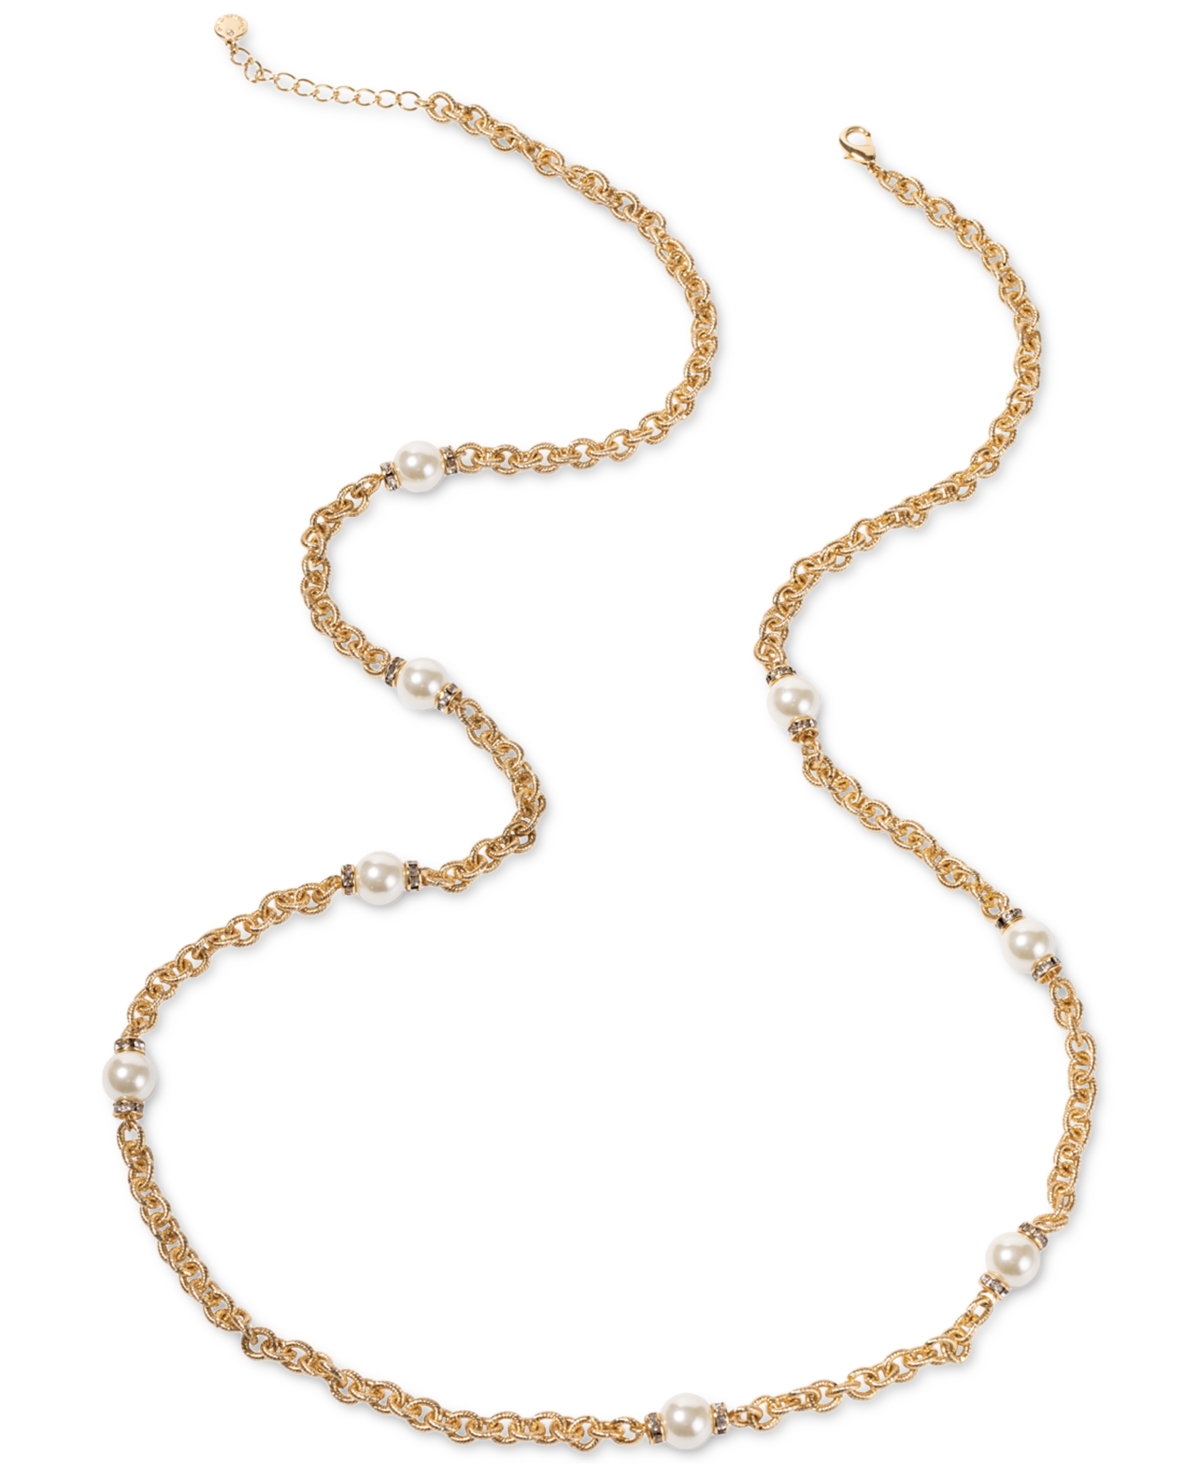 Gold-Tone Pave Rondelle Bead & Imitation Pearl Strand Necklace, 42" + 2" extender, Created for Macy's - White